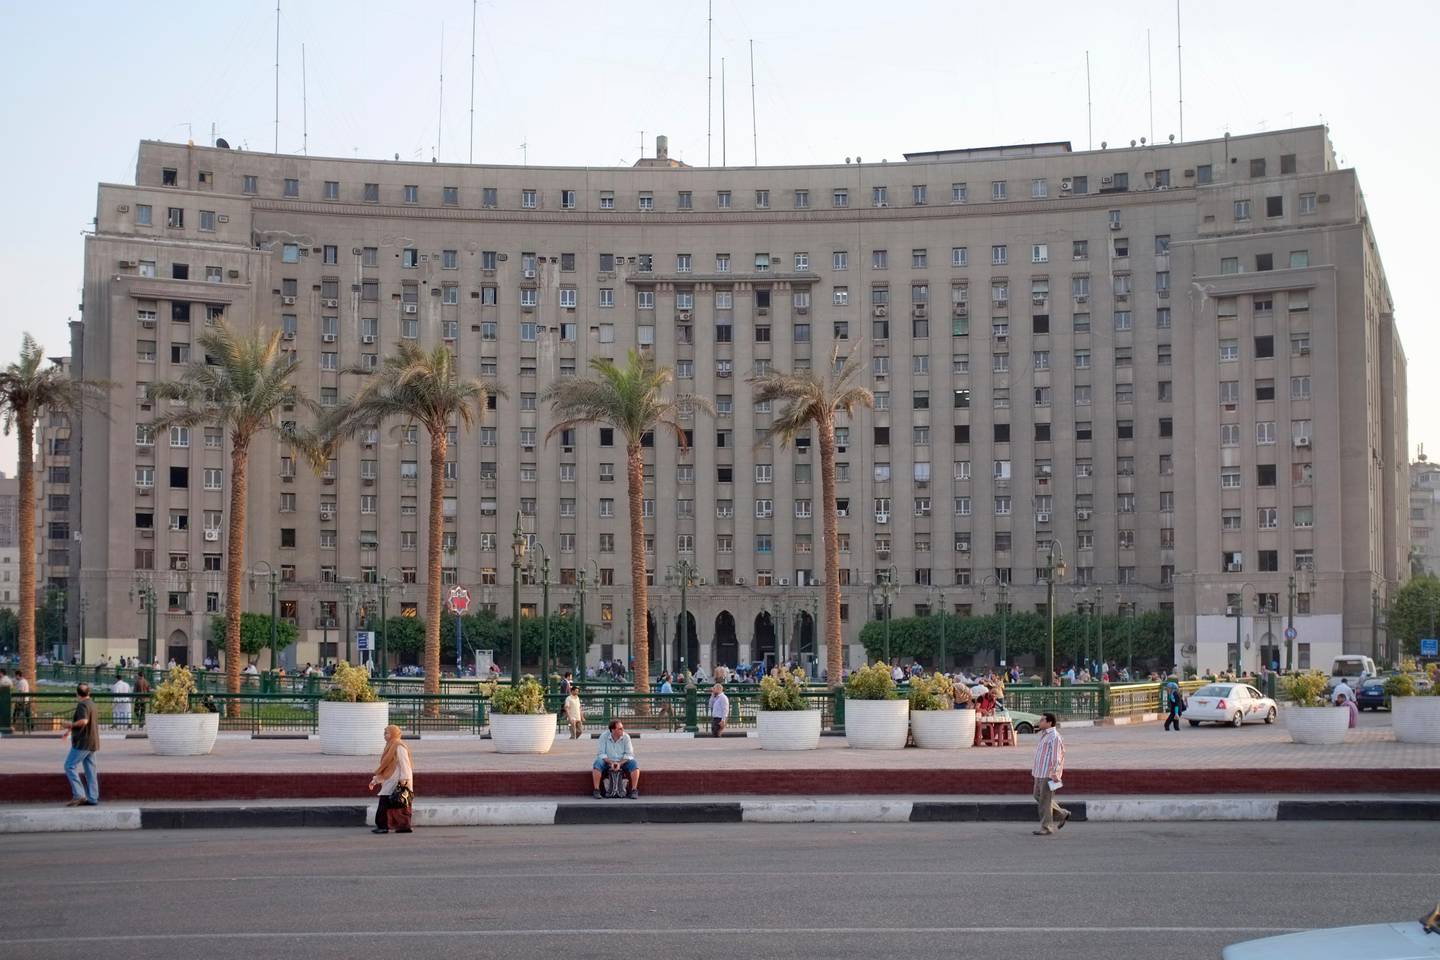 The Mogamma Building is a government building in Cairo, Egypt.  Mugamma is an administrative government building, where all the paper work is done by government agencies.  Tahrir Square may have become the center of the uprising in Egypt due to its poor planning.  Dr Rabbat said 22 streets connect to the plaza, which he calls space 